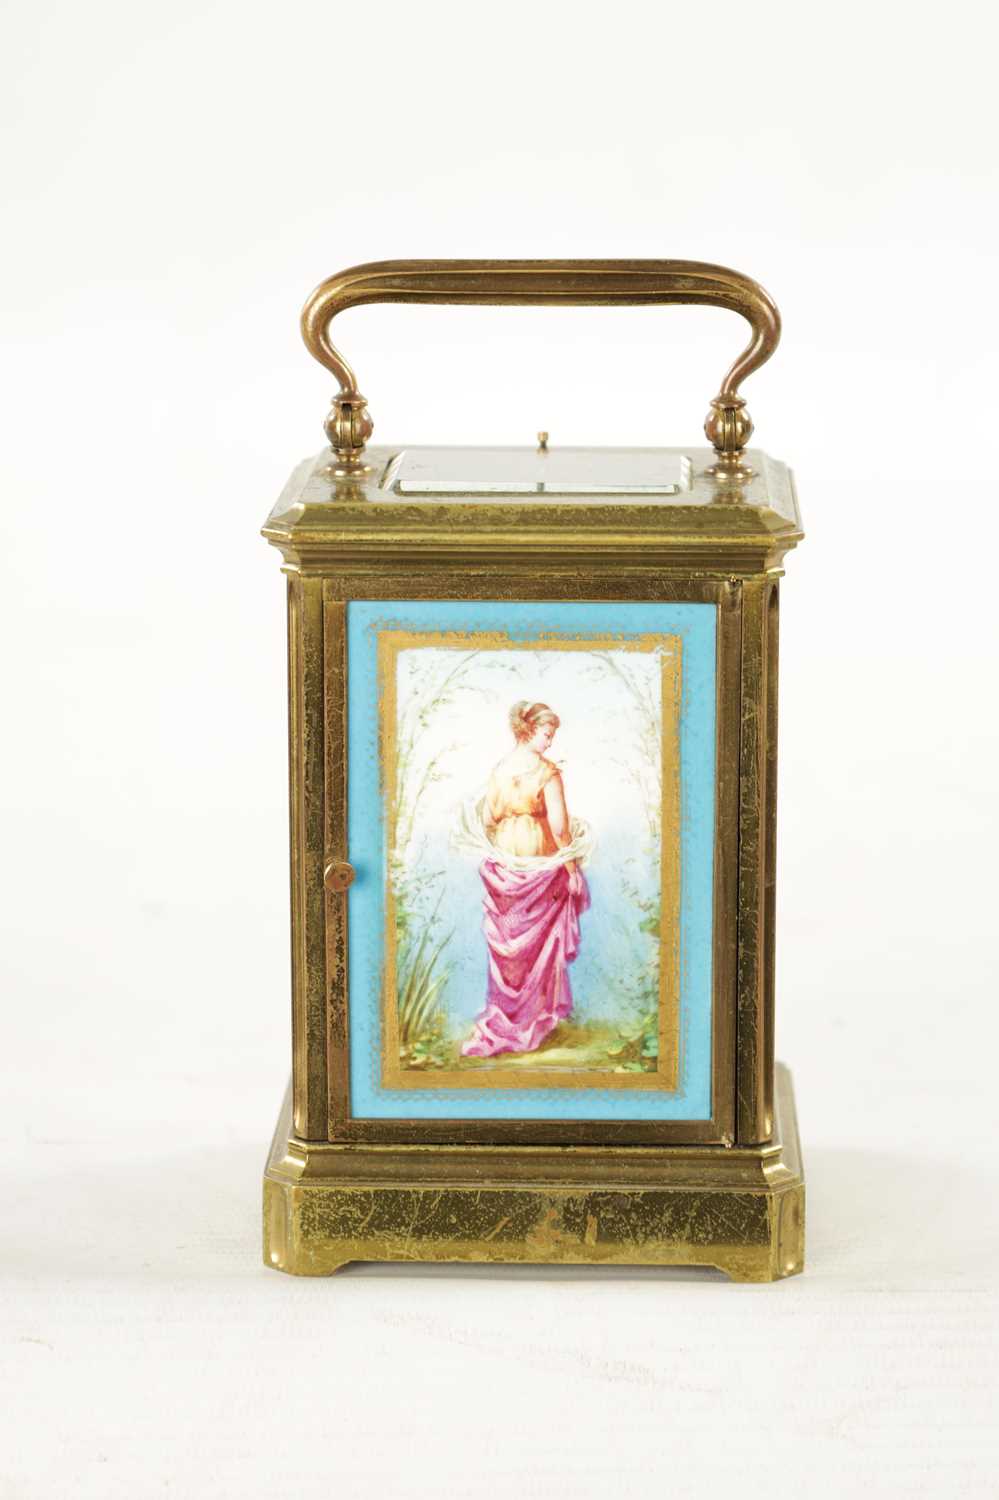 A LATE 19TH CENTURY FRENCH PORCELAIN PANELLED REPEATING CARRIAGE CLOCK - Image 6 of 10